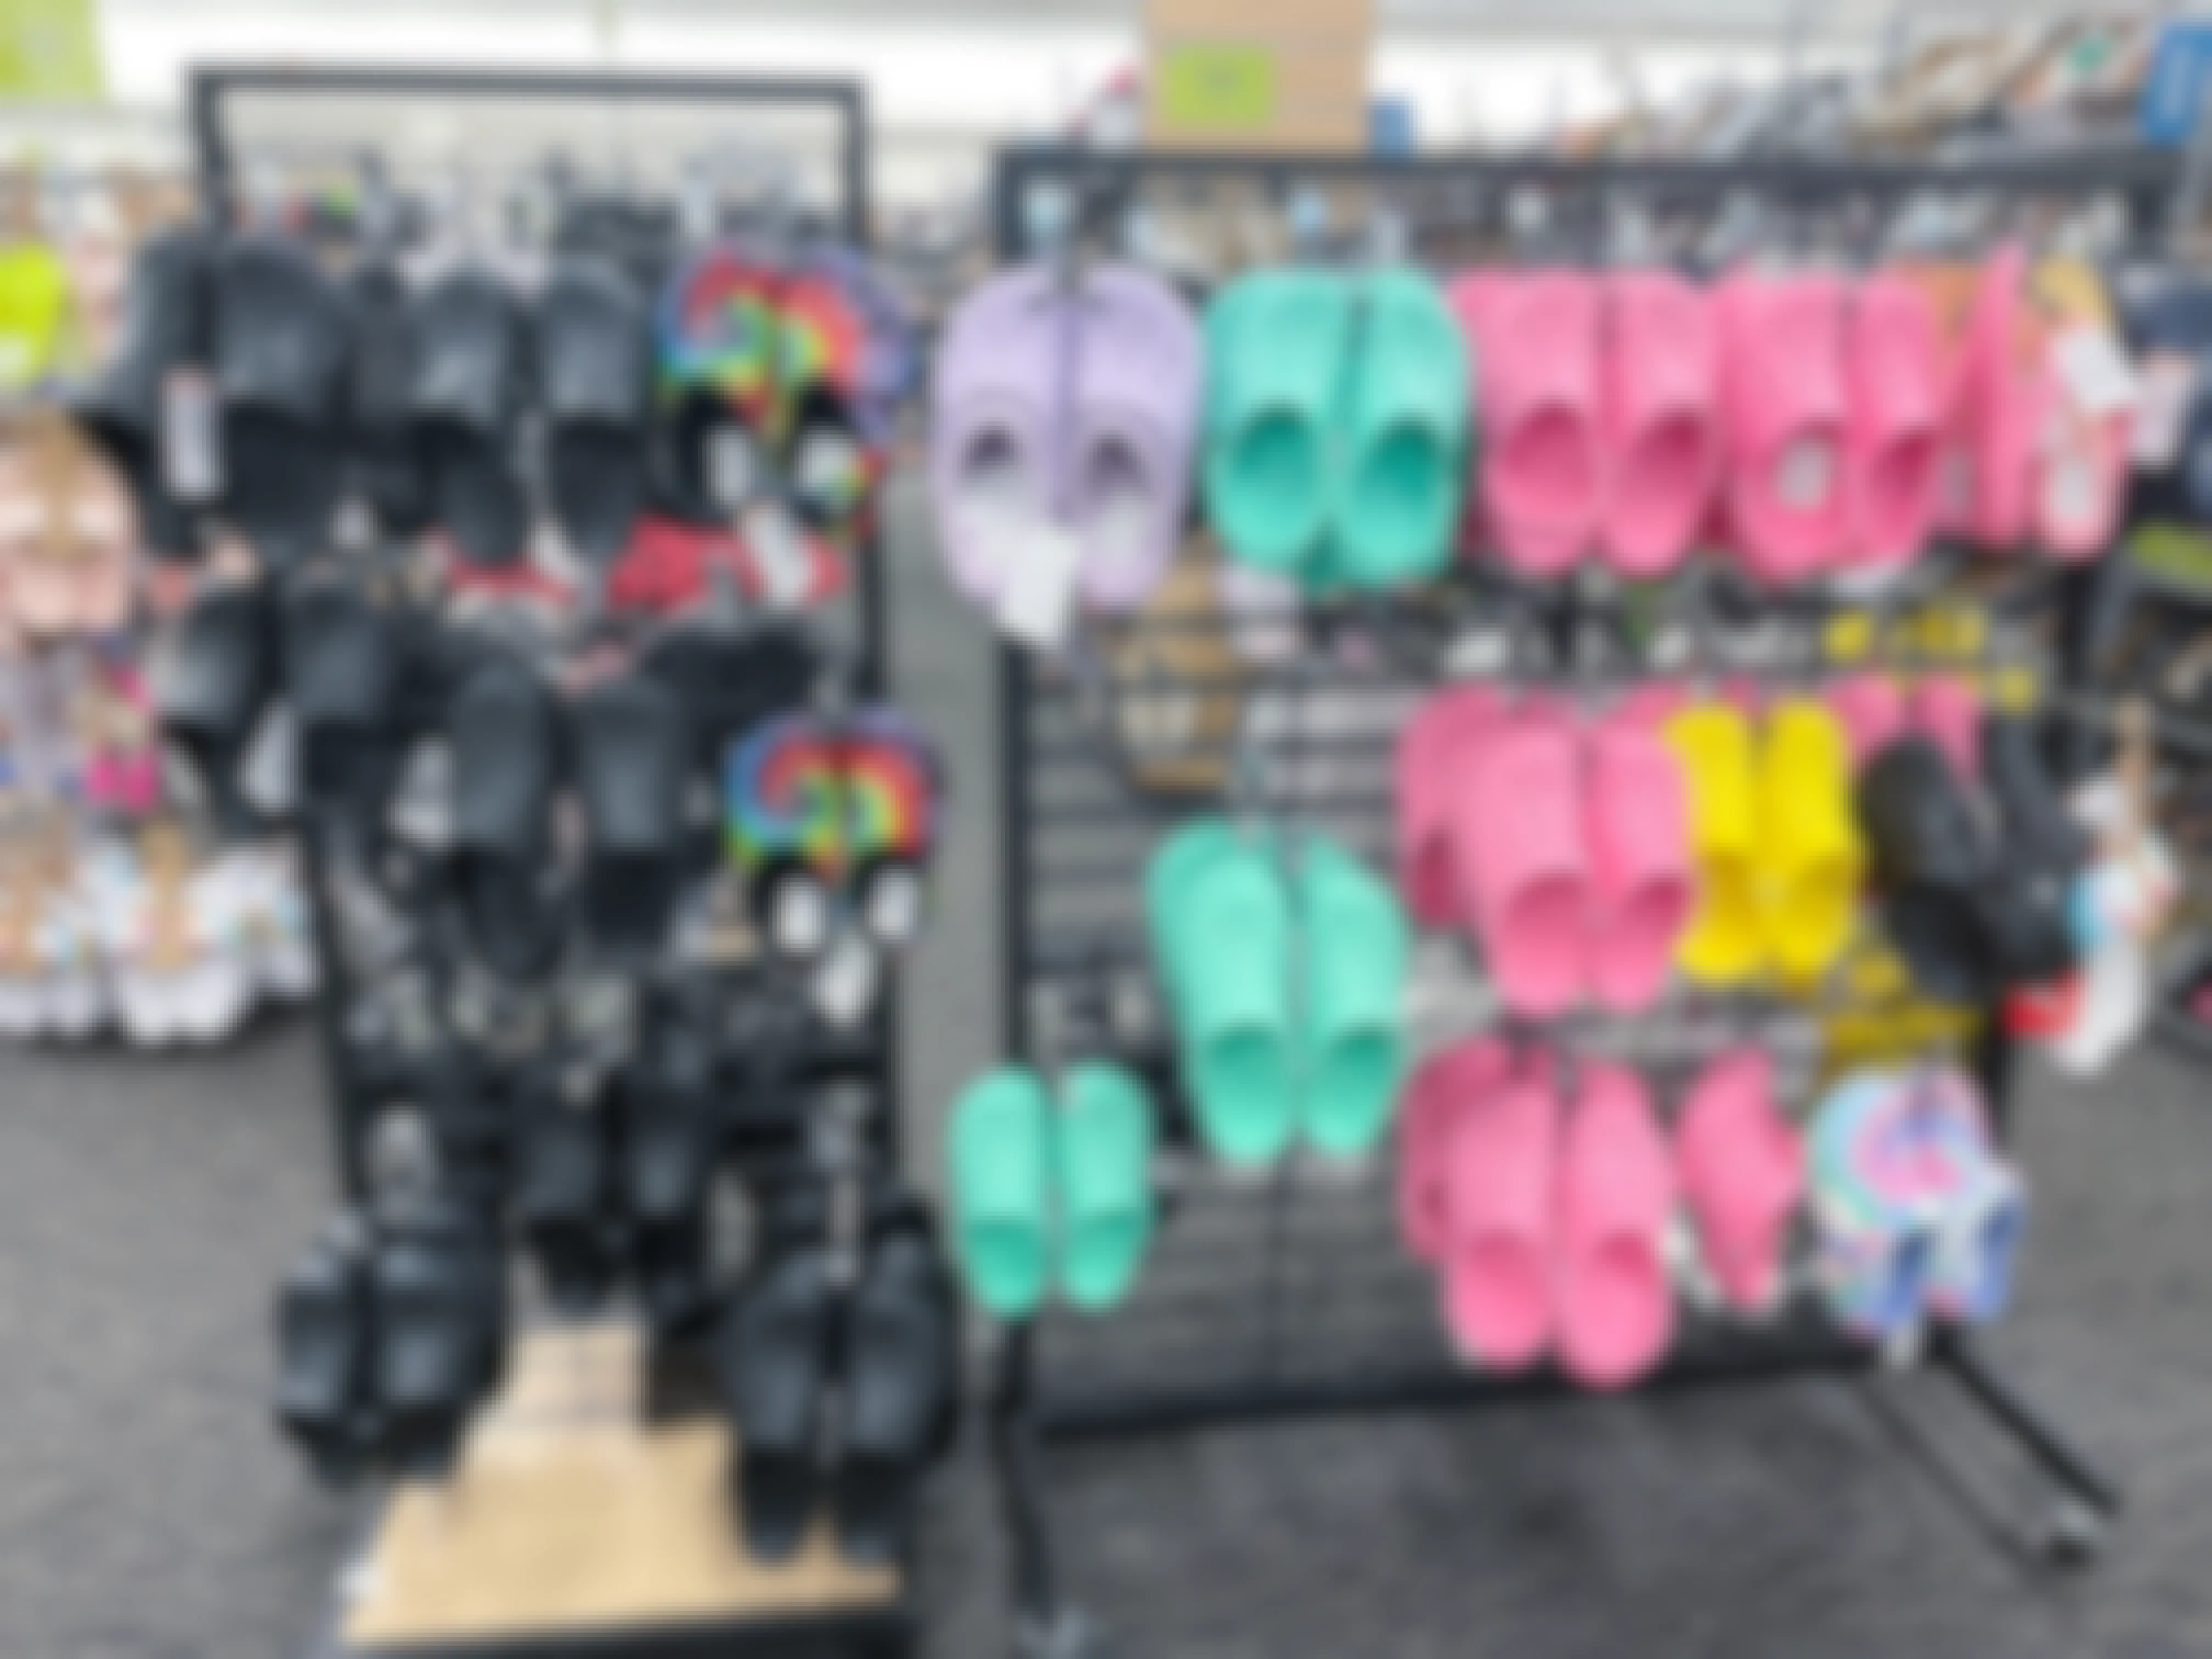 A display of hanging Crocs classic clogs at a shoe store.